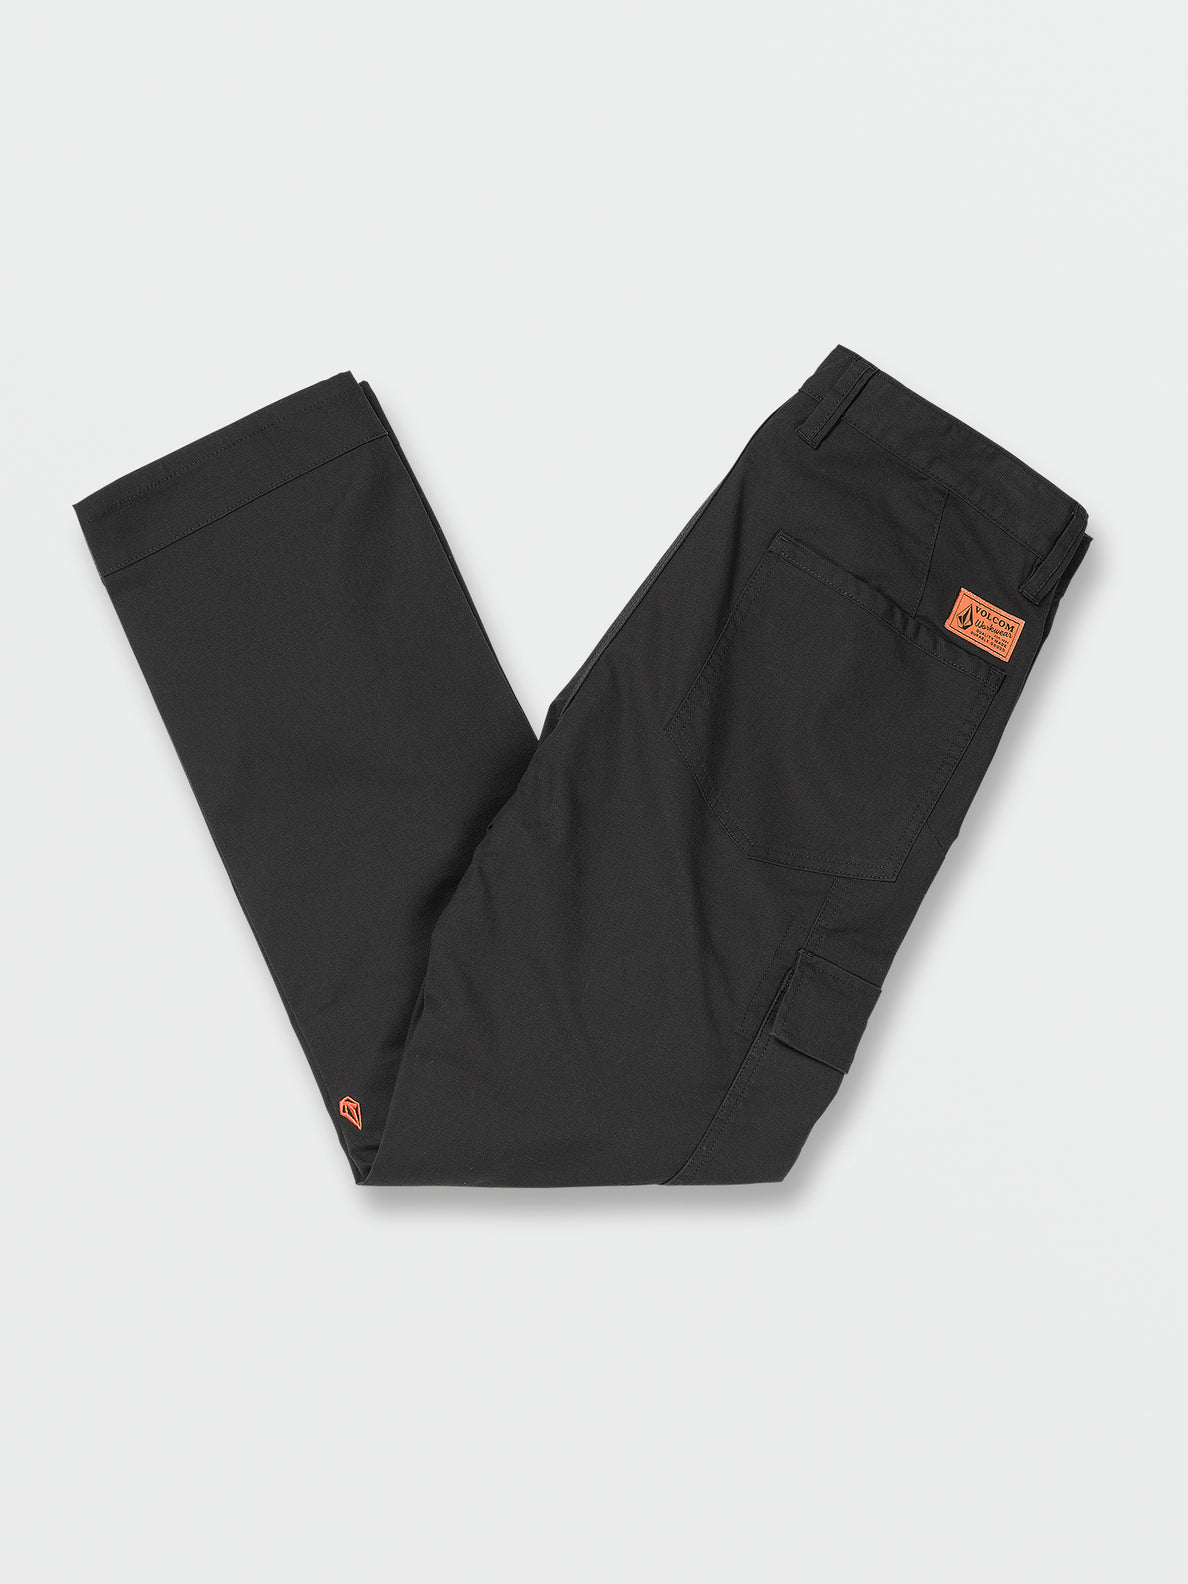 13 Best Black Work Pants for Women in 2023 According to Editors and Reviews